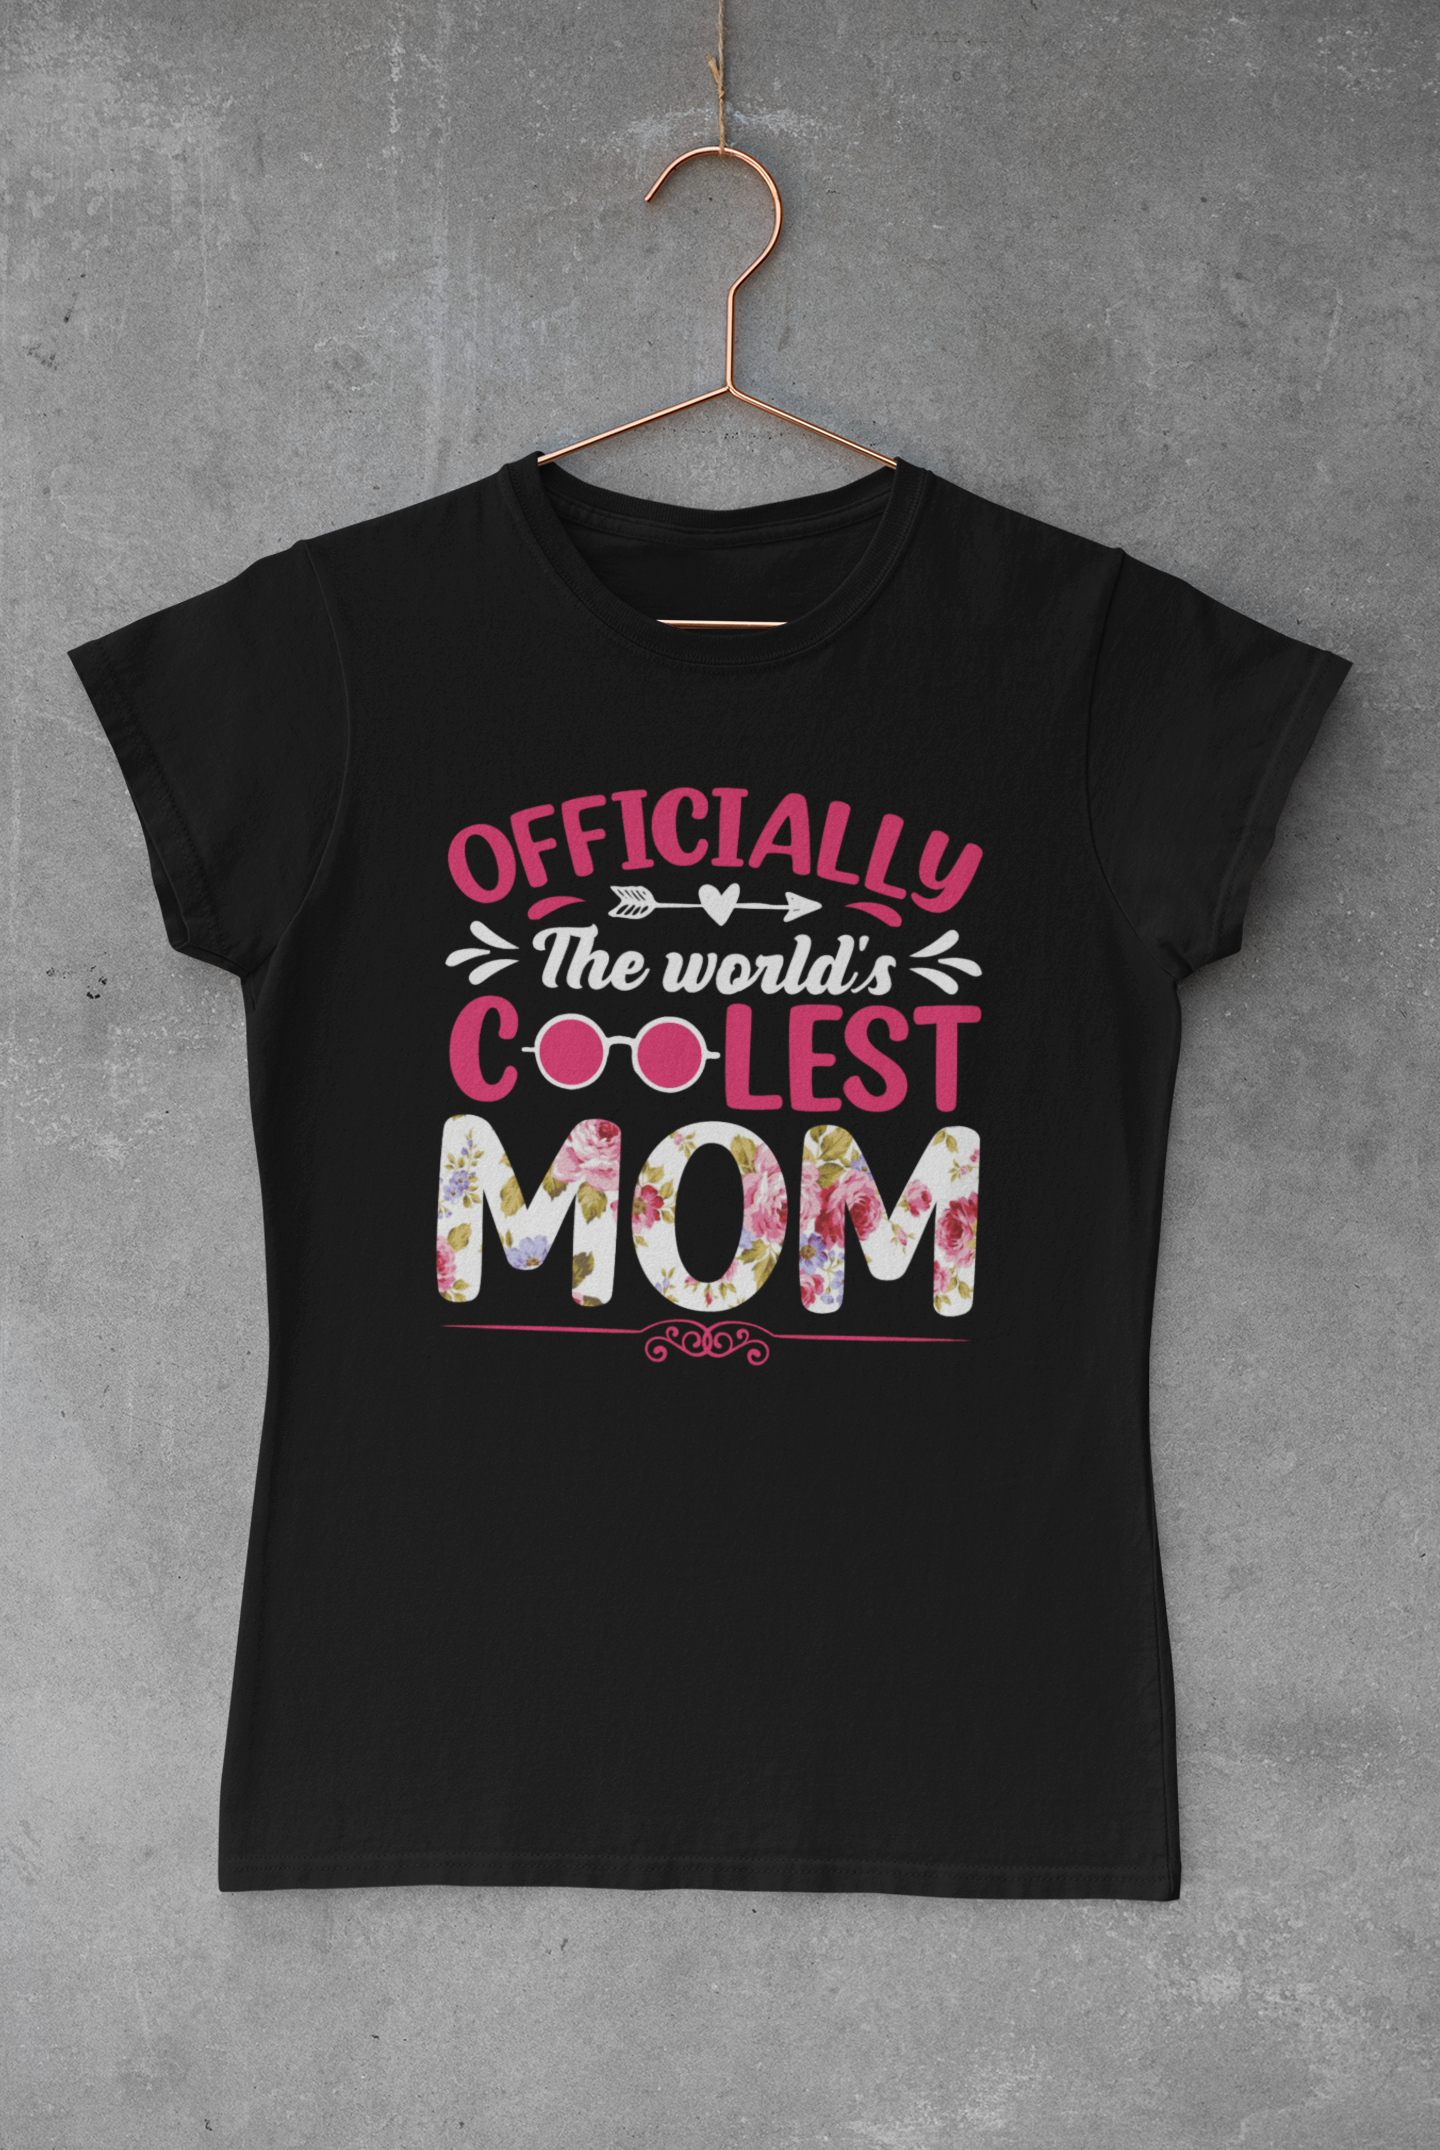 Officially The World's Coolest Mom T-shirt